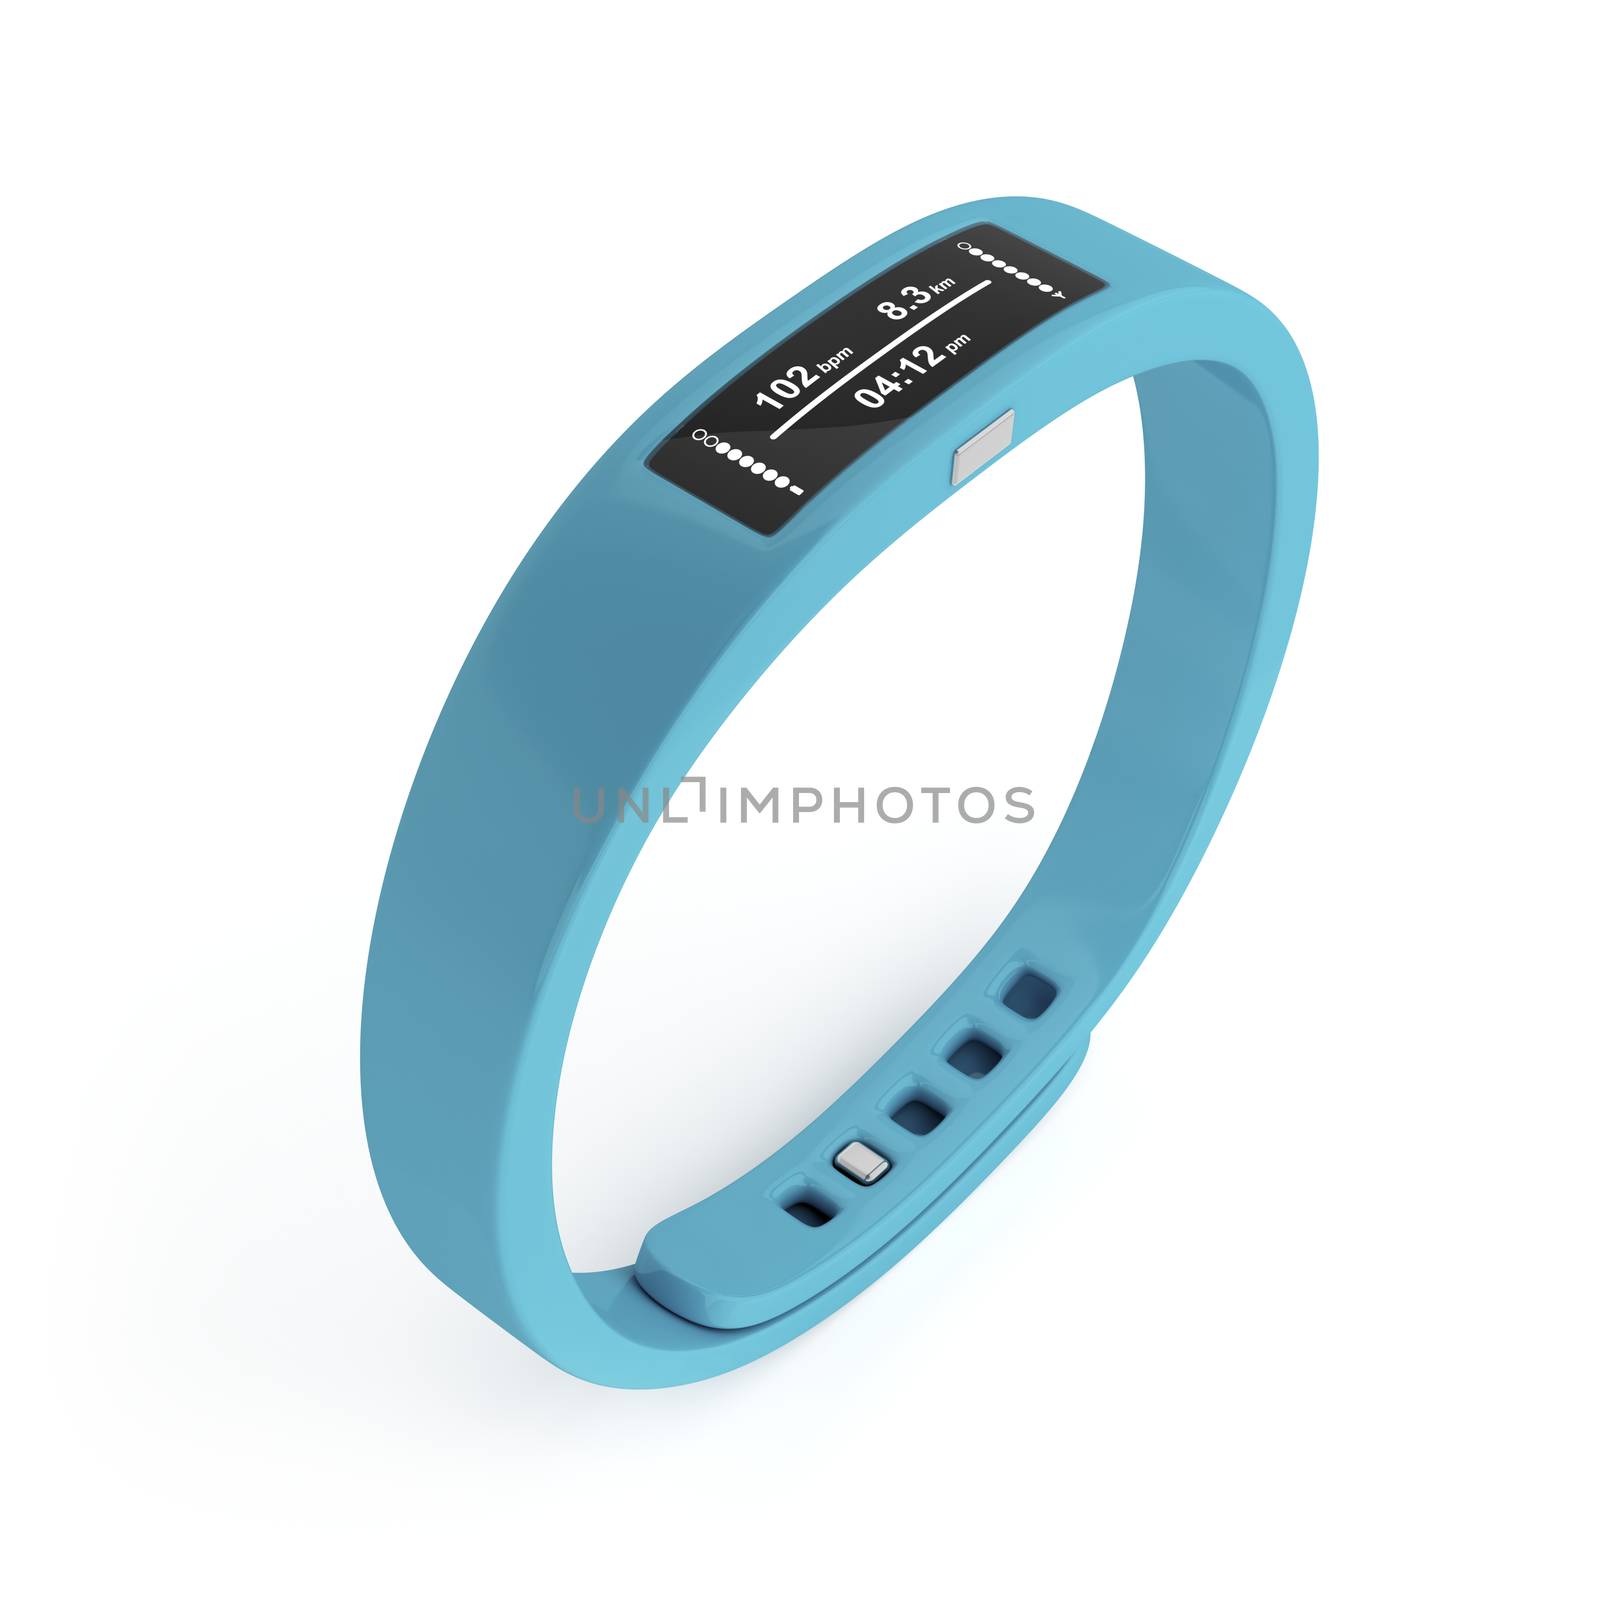 Activity tracker by magraphics